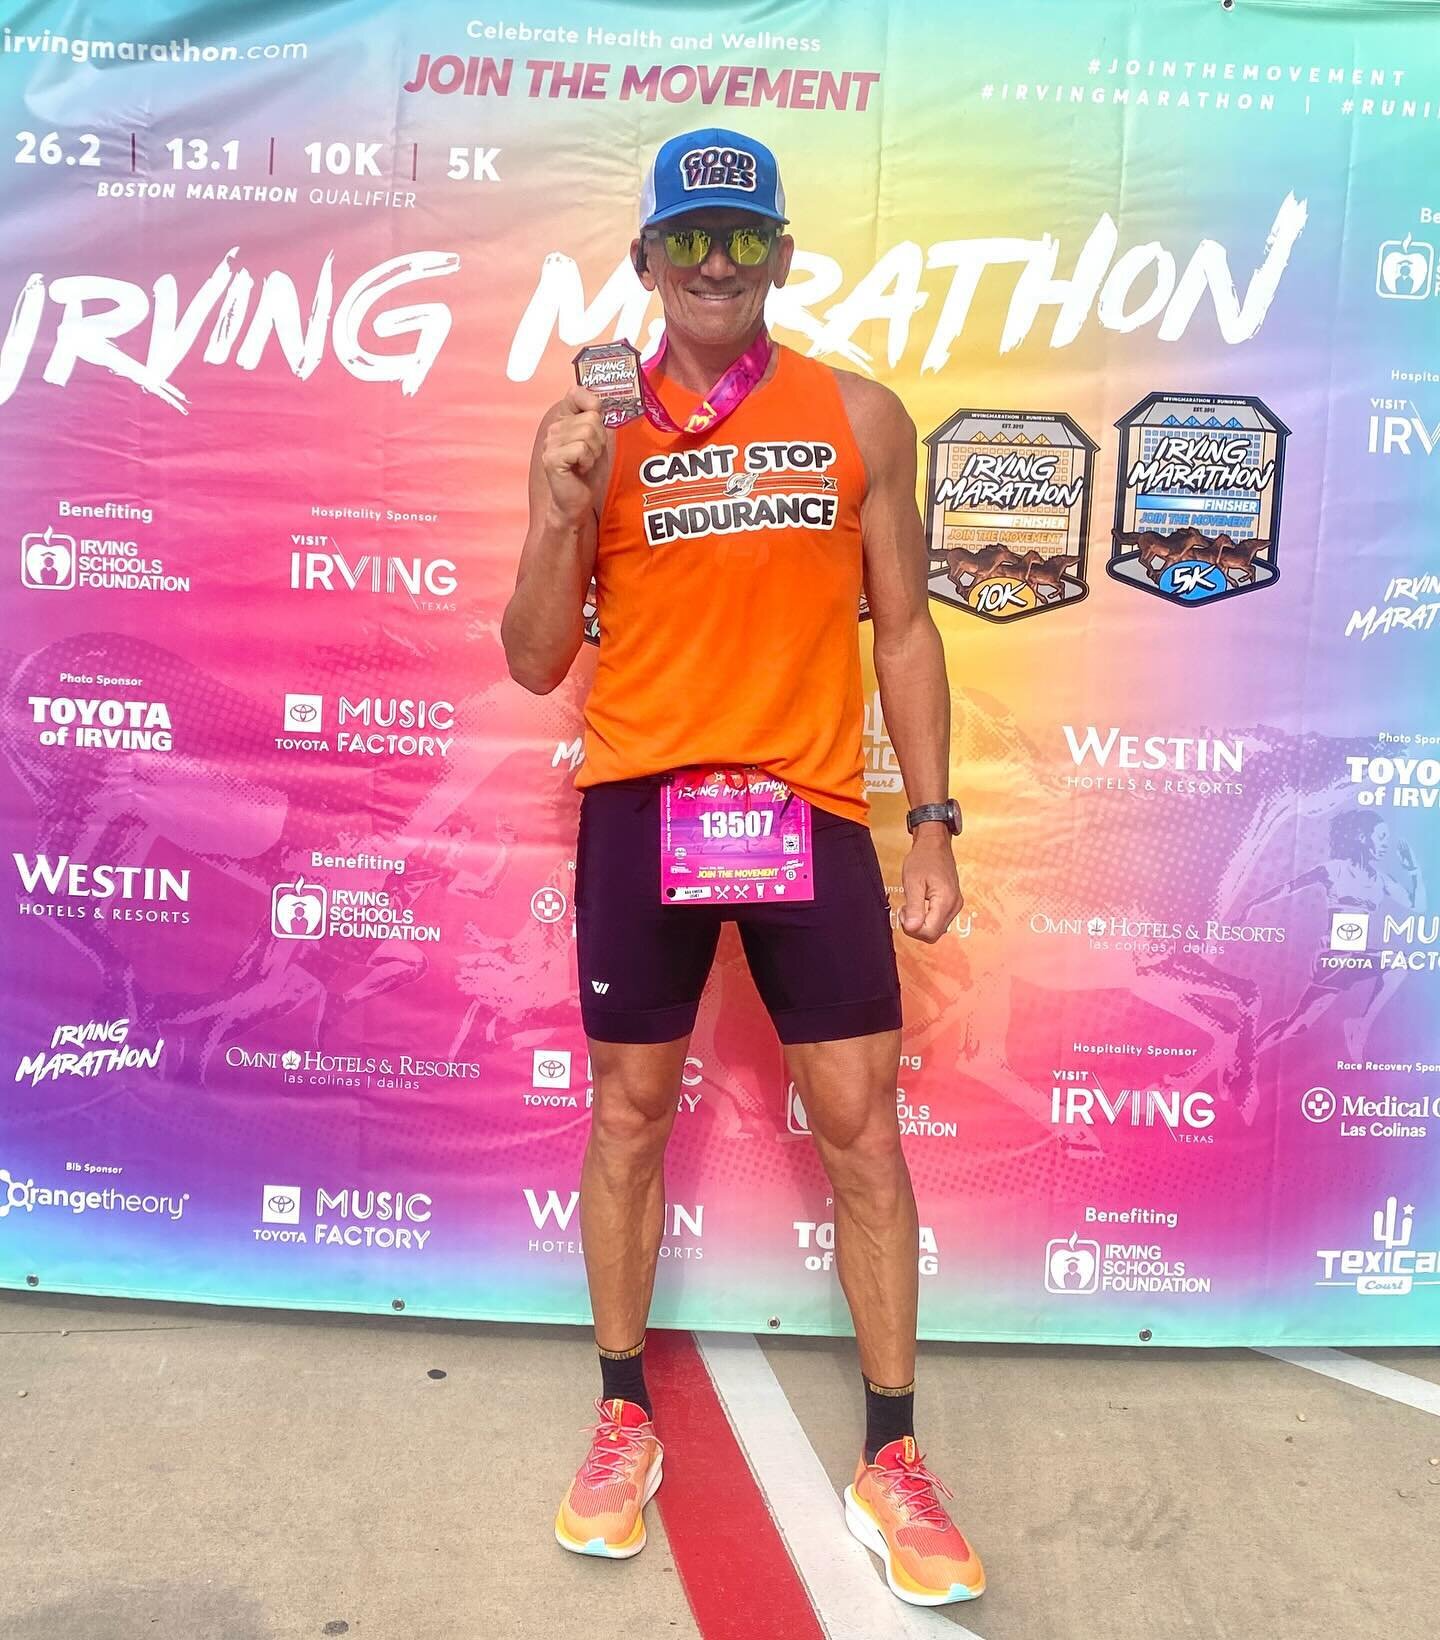 Irving Half-Marathon race report: The goal was smart, patient pacing for the first 8 miles. &ldquo;Run the mile you are in&rdquo; was my mantra. This&nbsp;mindset&nbsp;served me well as the miles floated by and I was right on pace. After the first mi